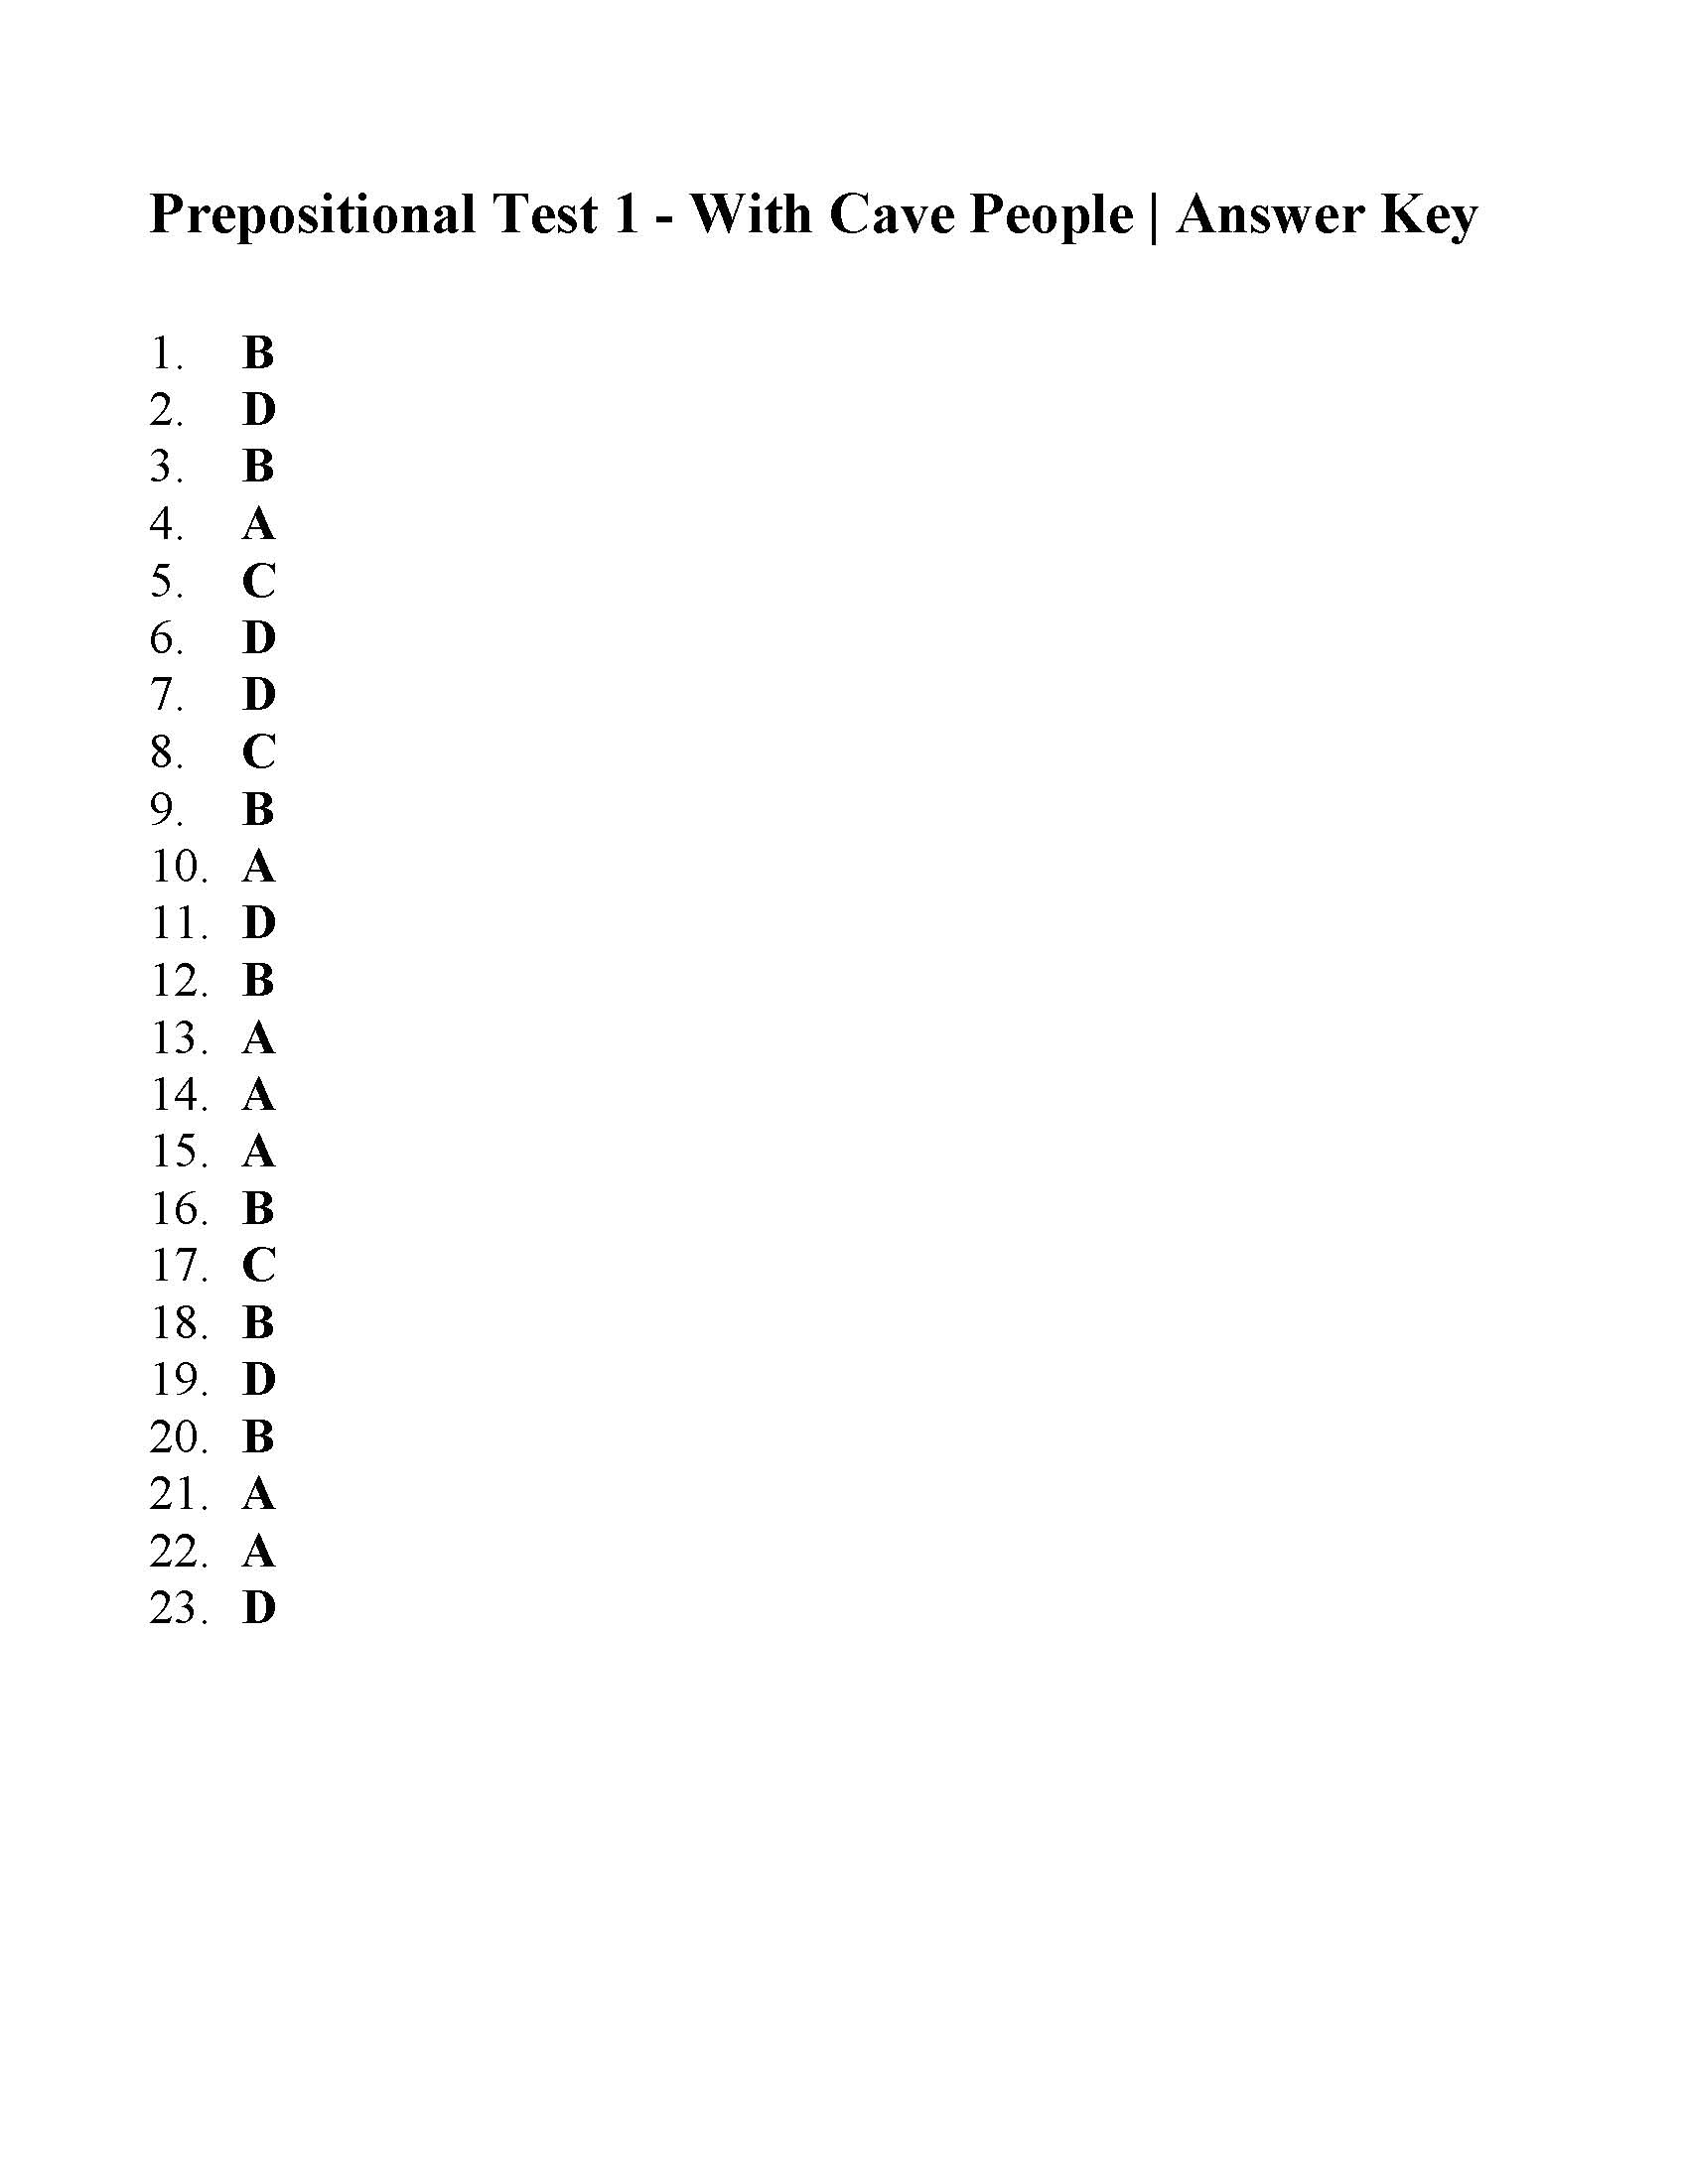 This is the answer key for the Prepositions Test 1.